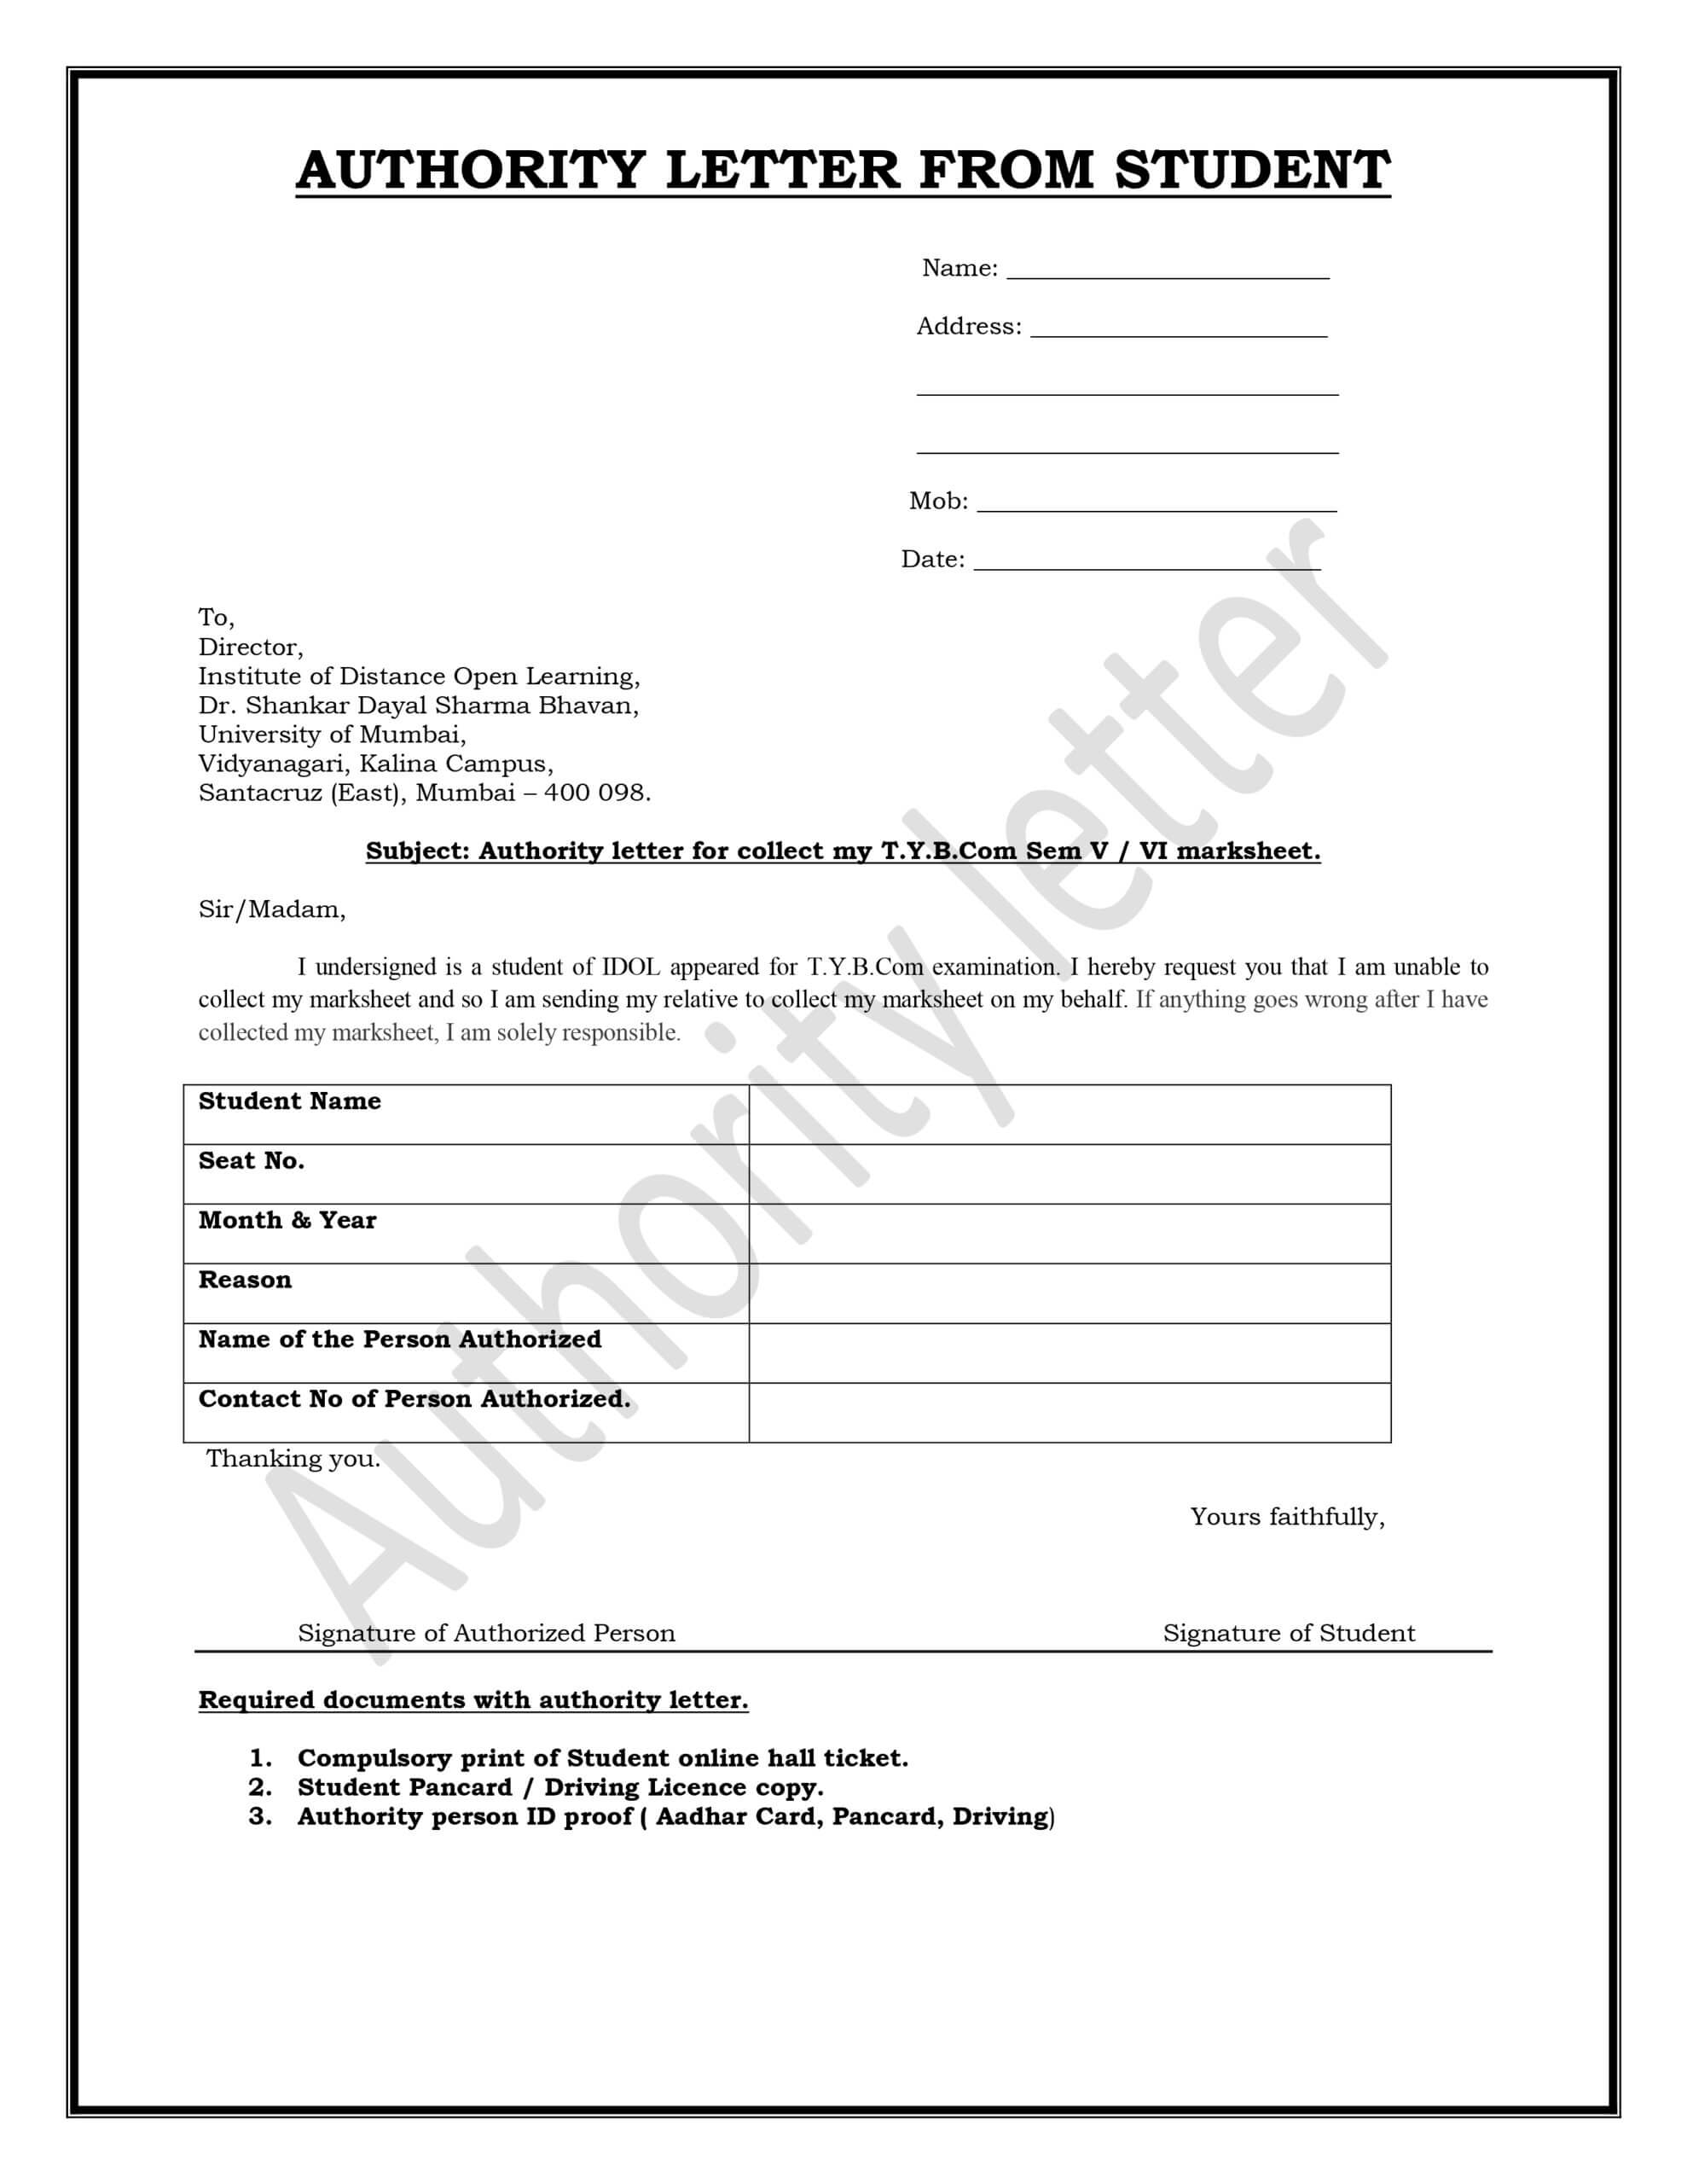 Authorization Letter to Collect Mark sheet